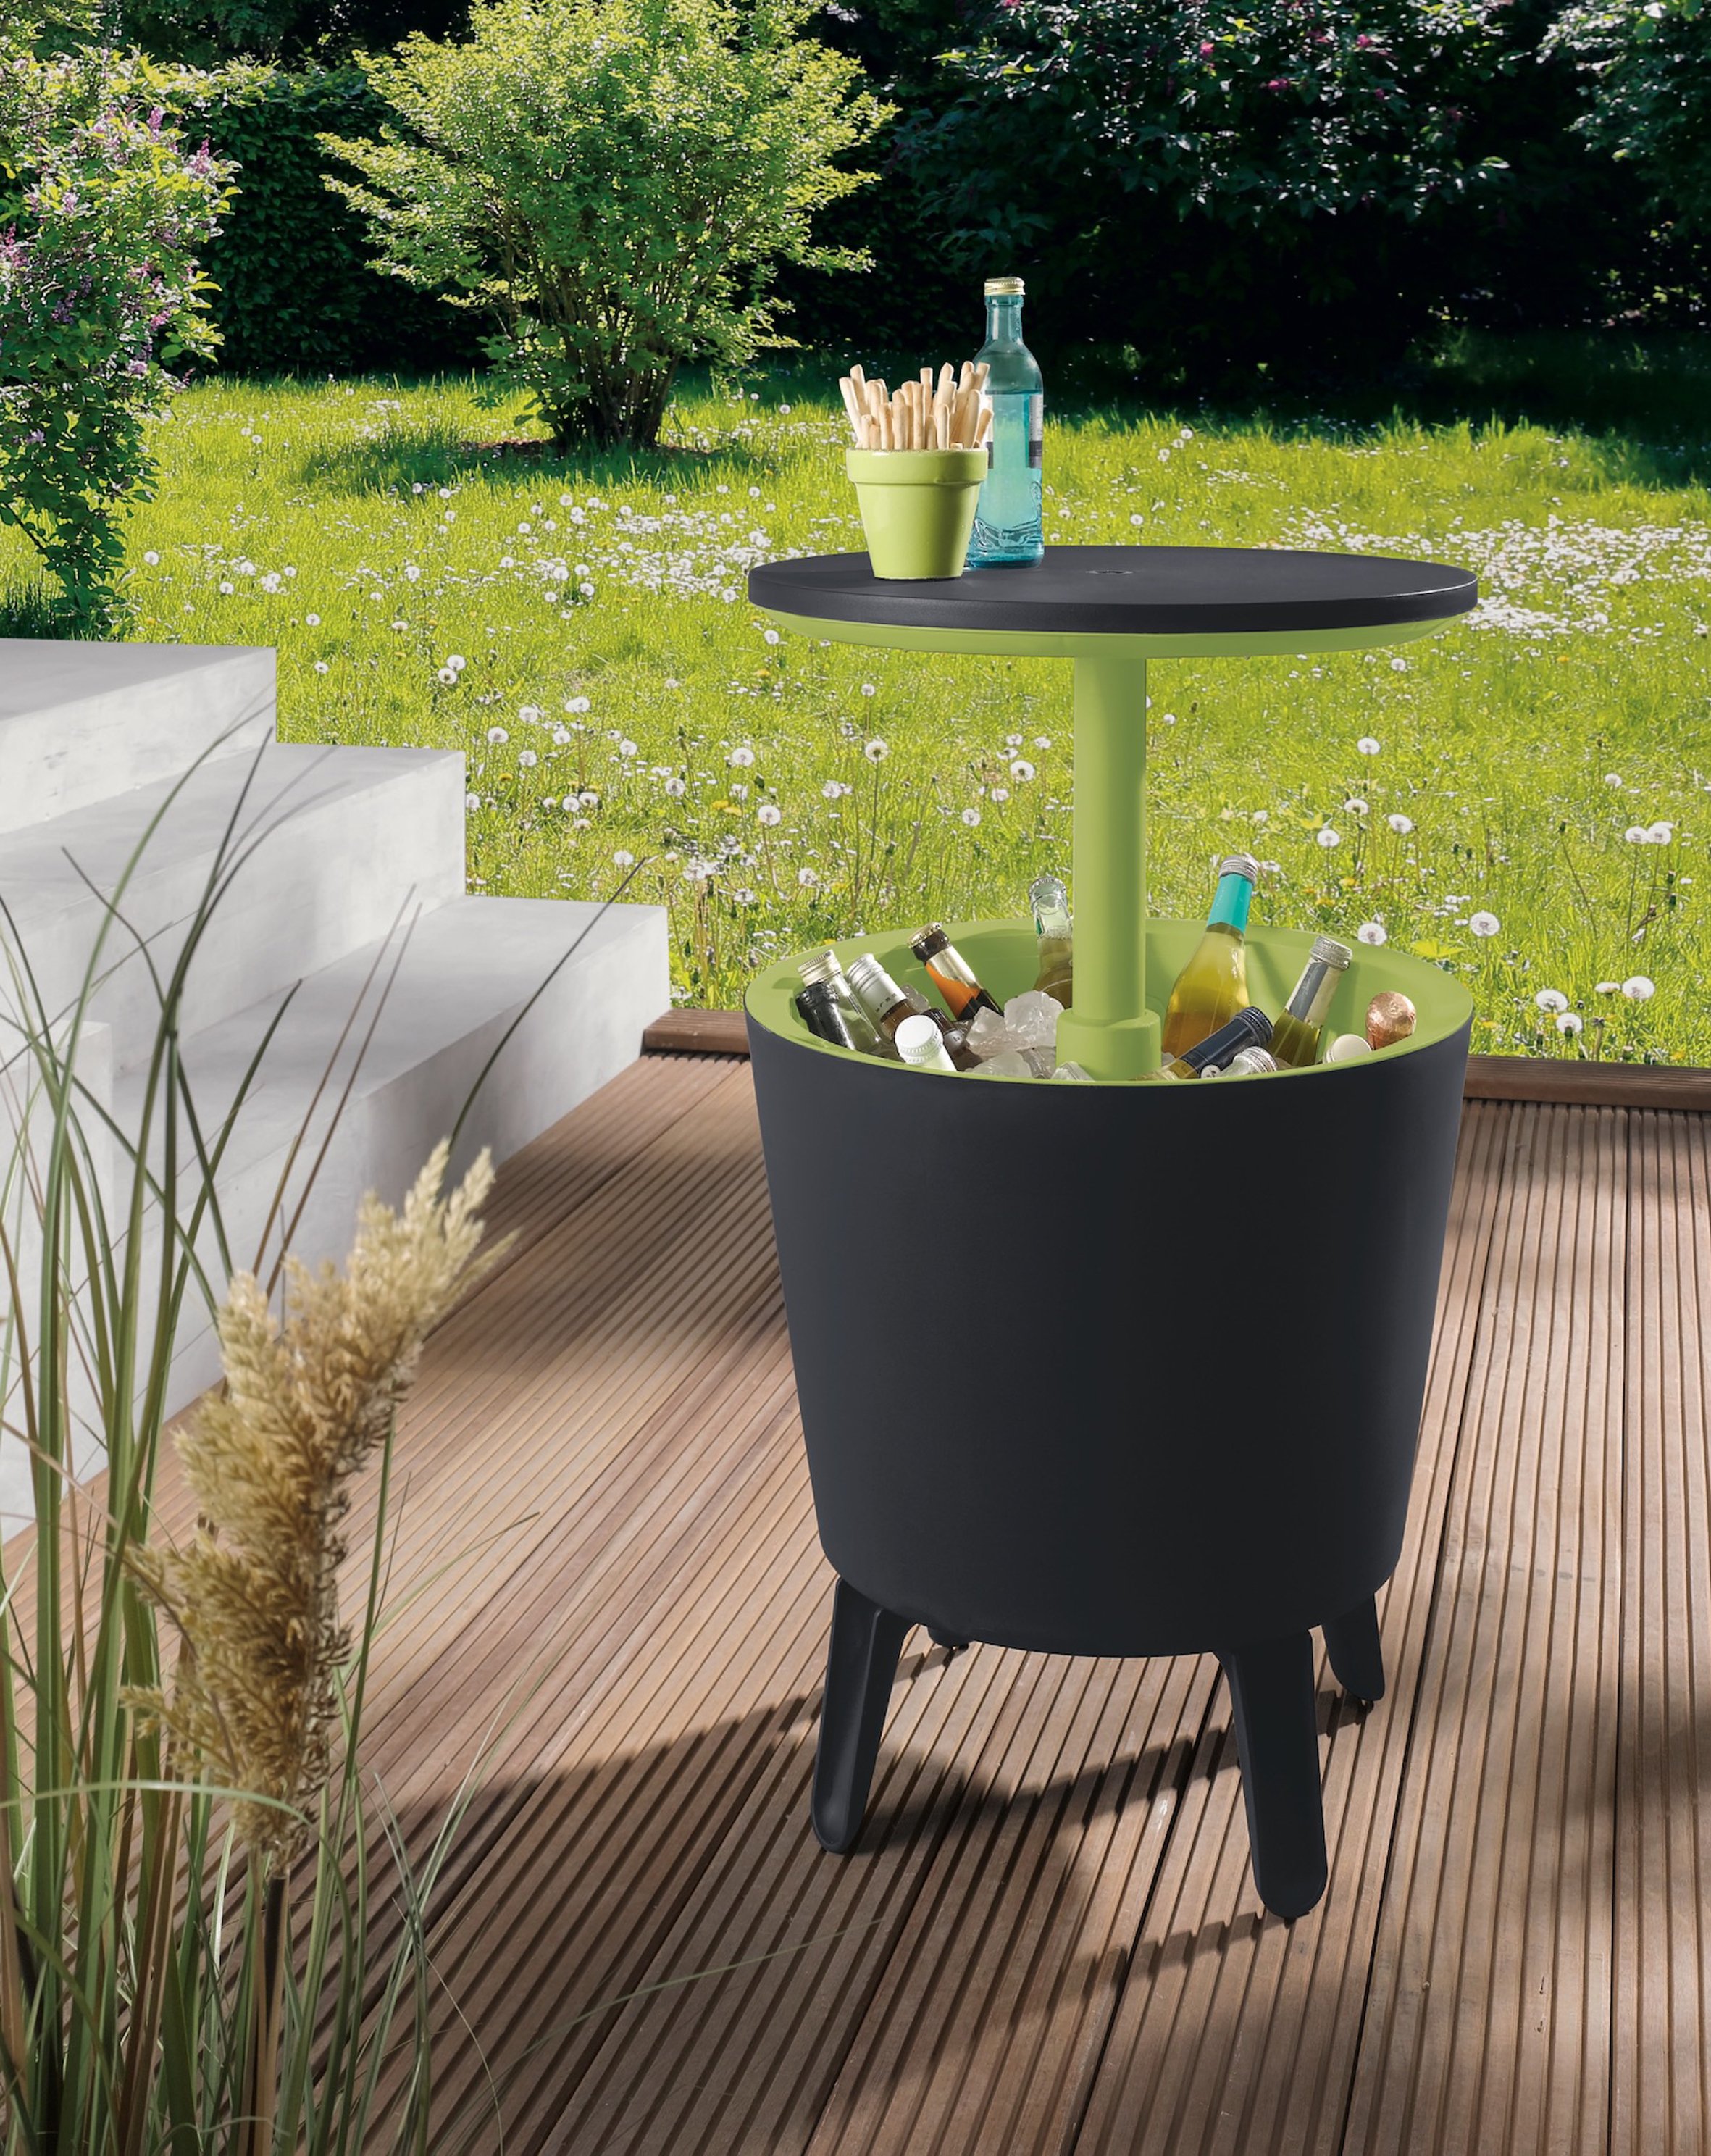 8. Livarno Home Party Table with Ice Bucket €58.95, 